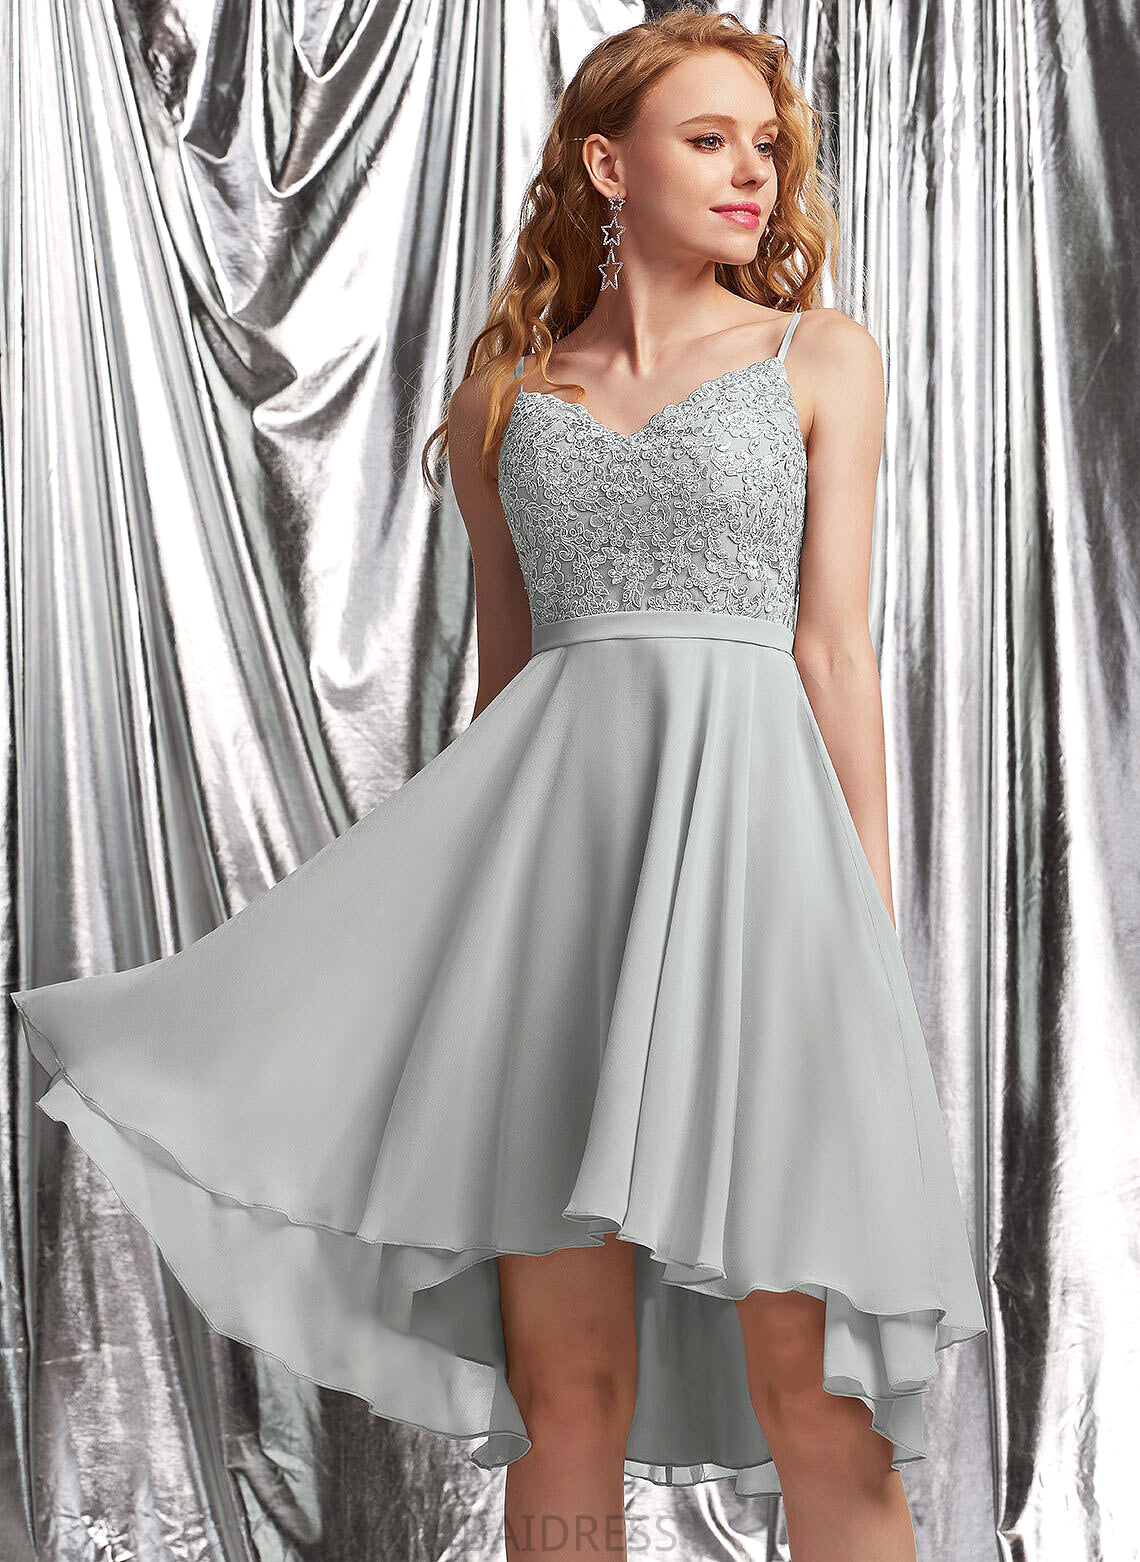 With Asymmetrical V-neck A-Line Chiffon Beading Emilee Prom Dresses